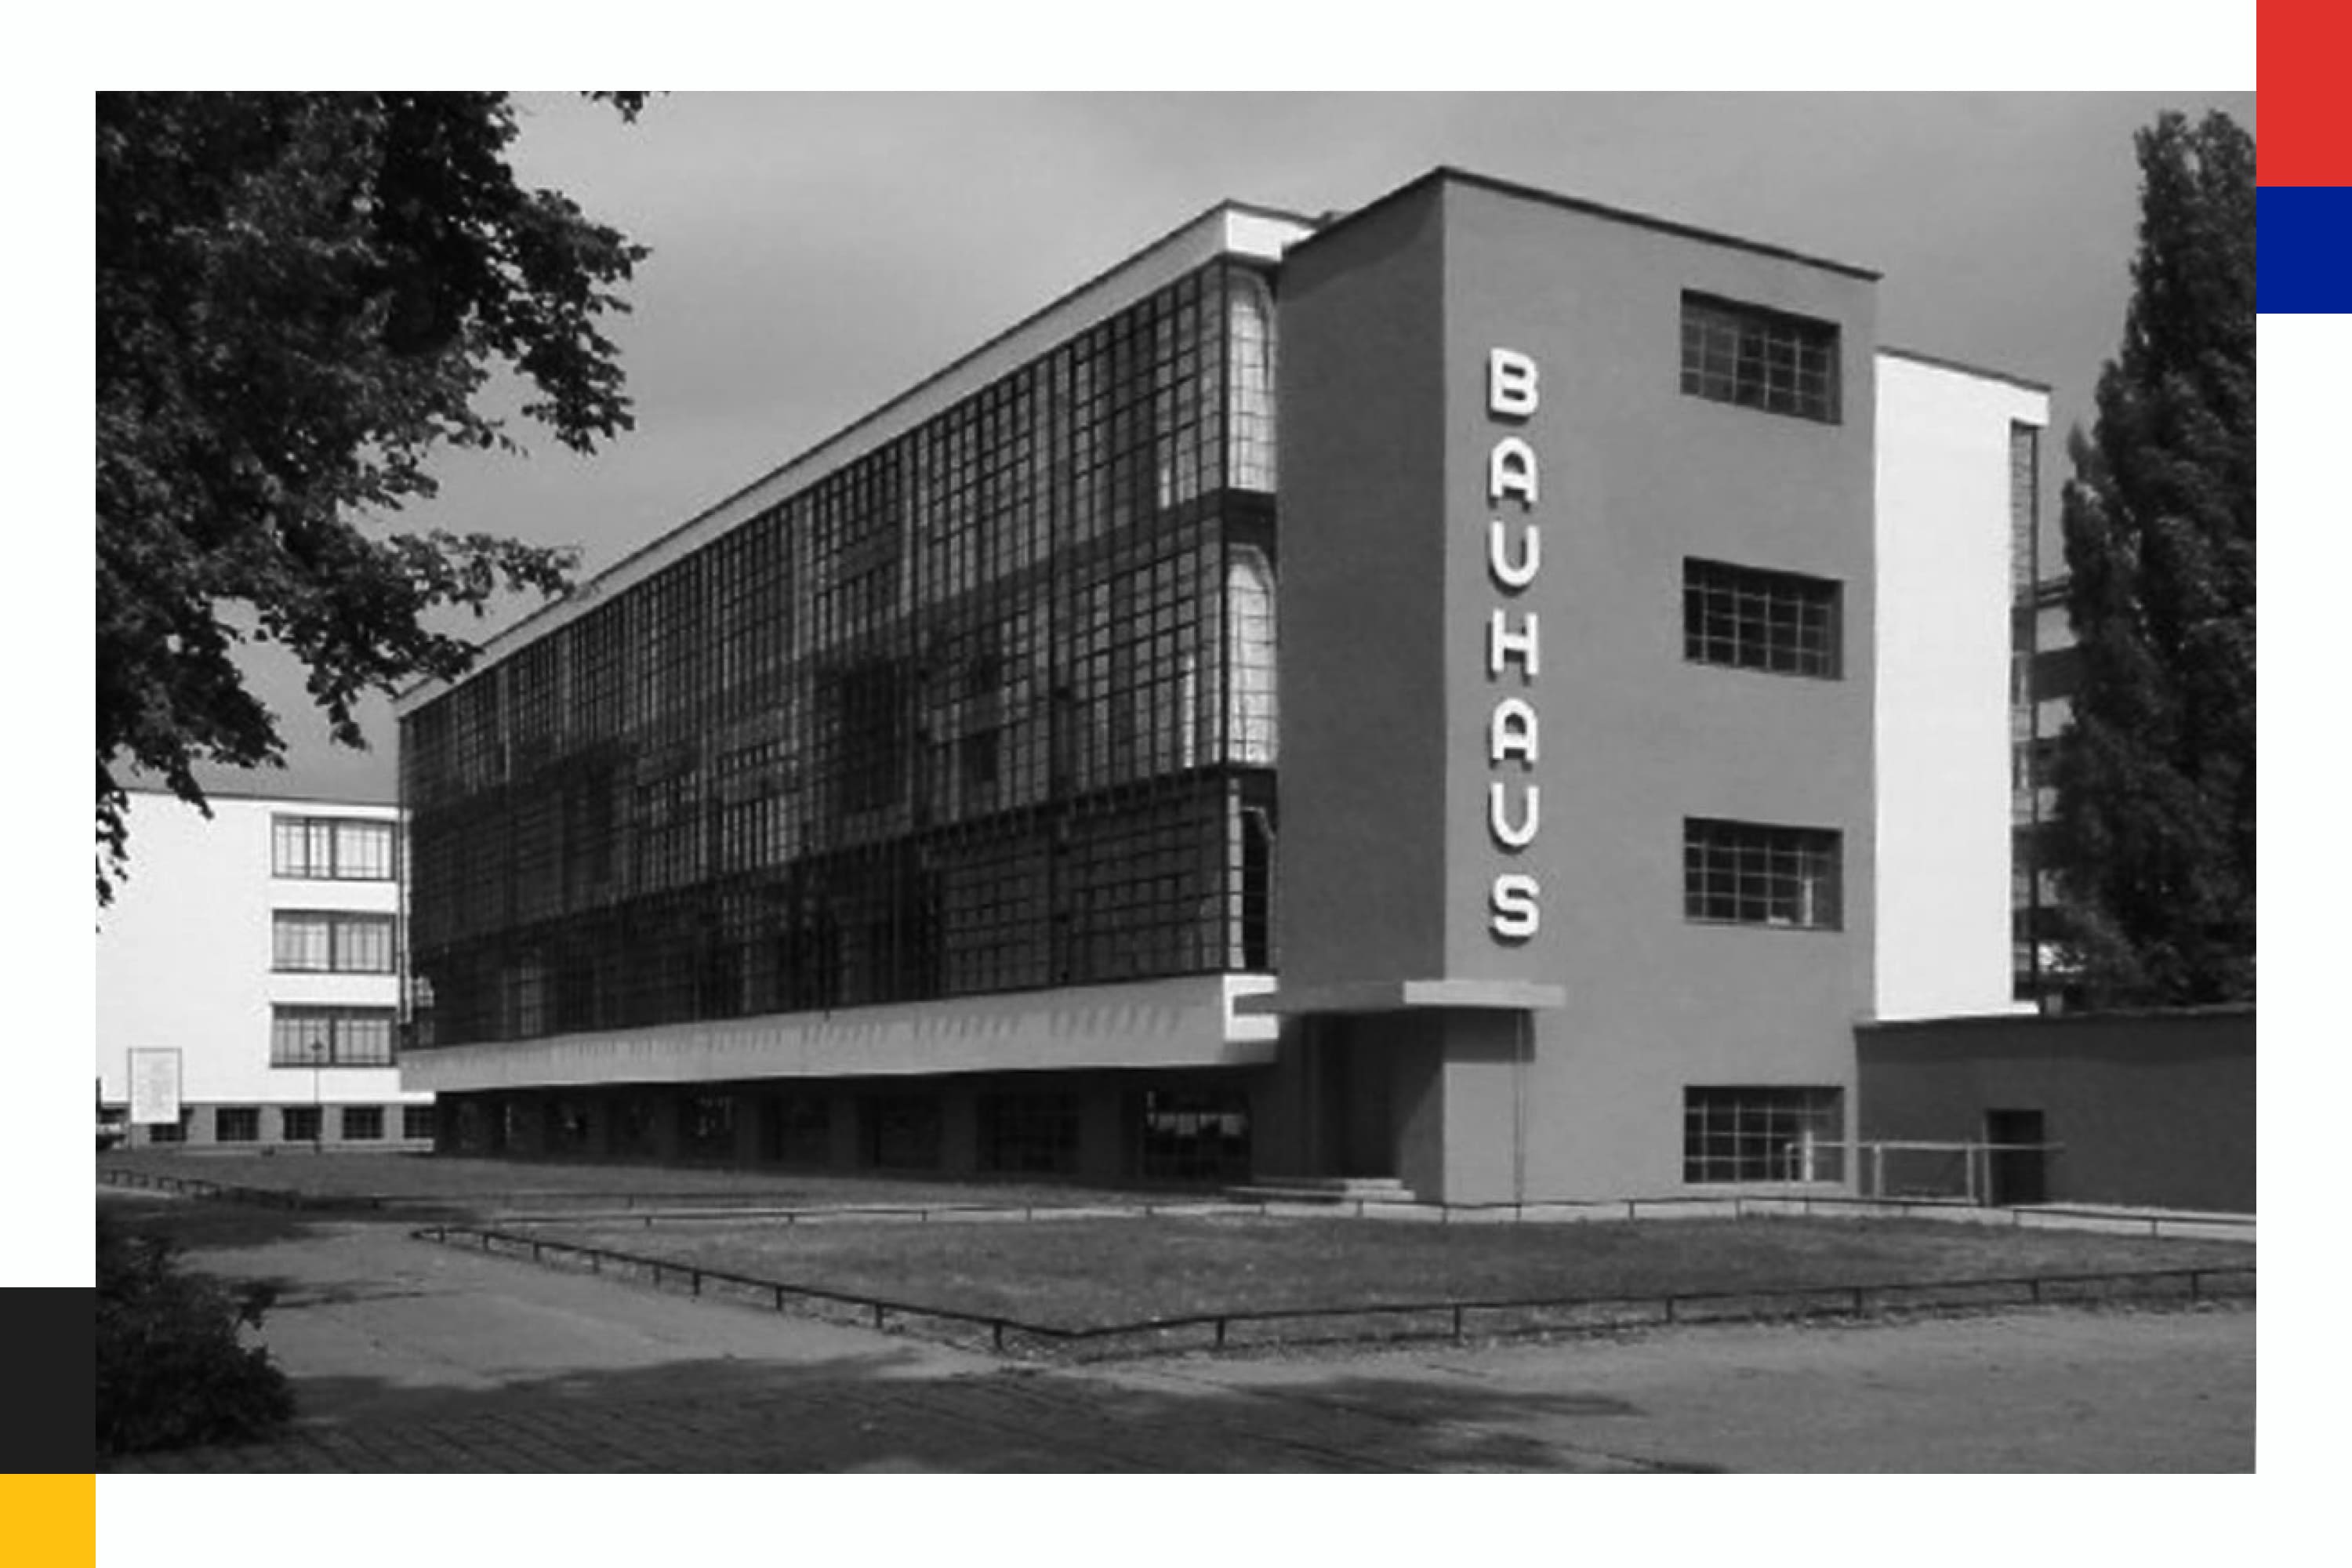 Black and white photo of the building with logo inscription BAUHAUS.